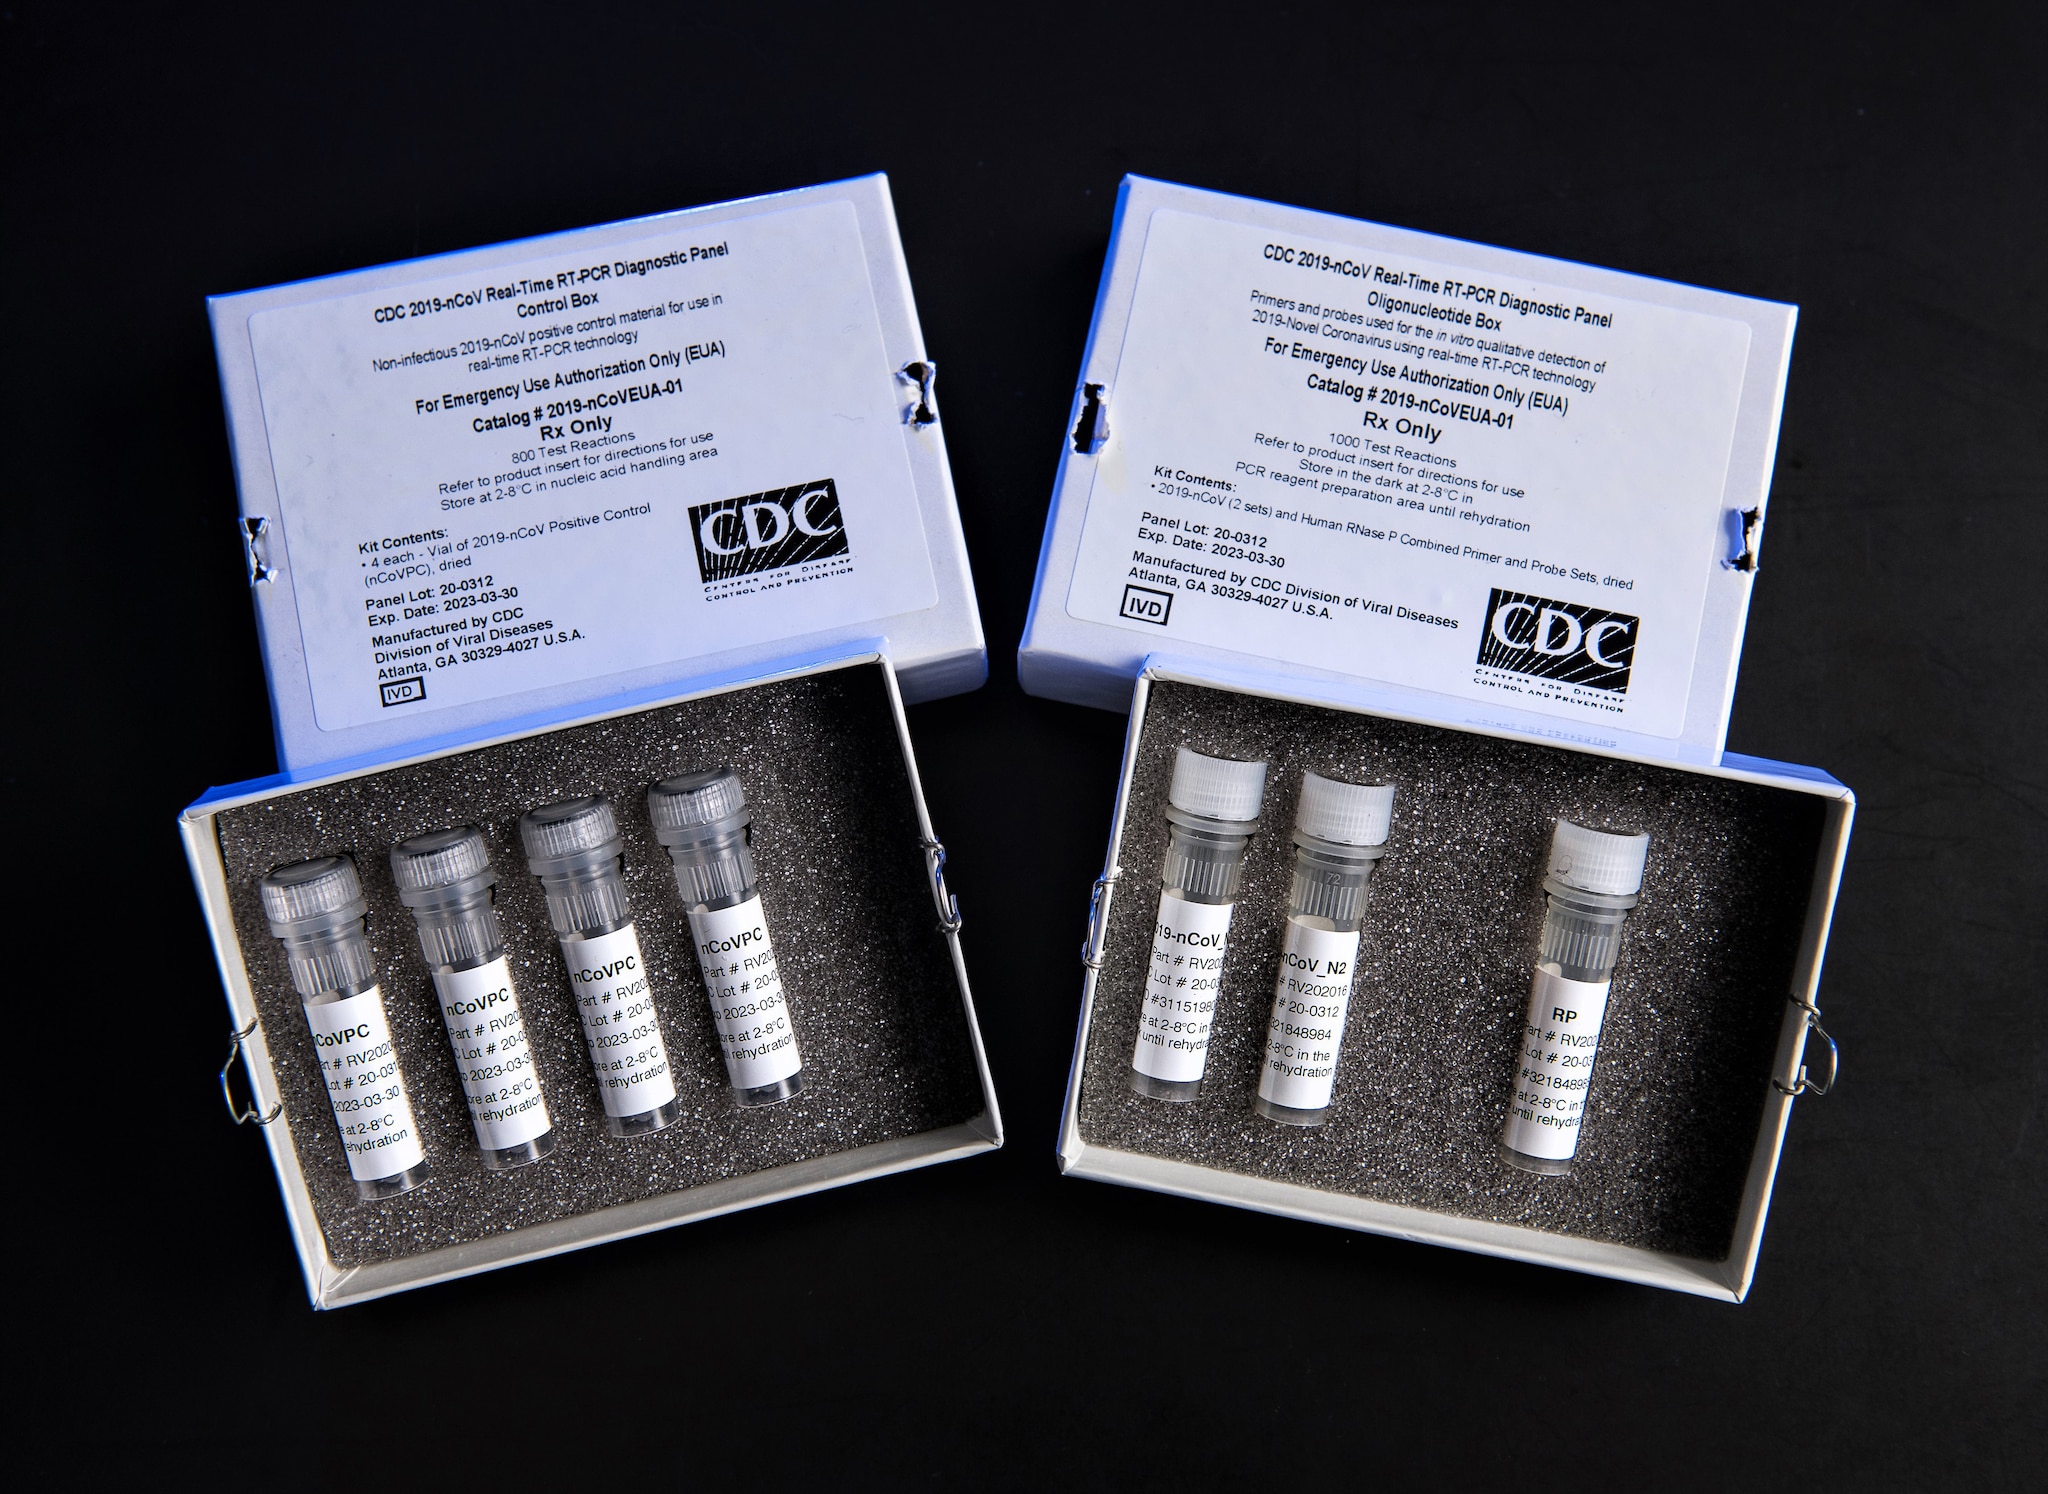 This is a picture of CDC’s laboratory test kit for the 2019 novel coronavirus (2019-nCoV).